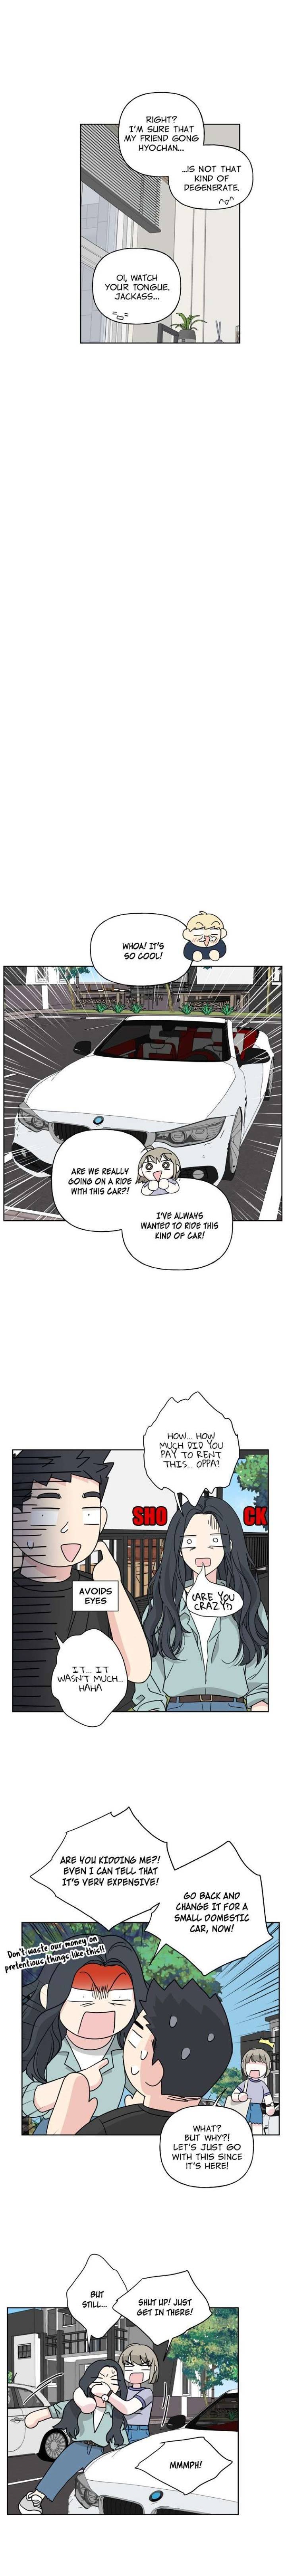 mother-im-sorry-chap-32-7